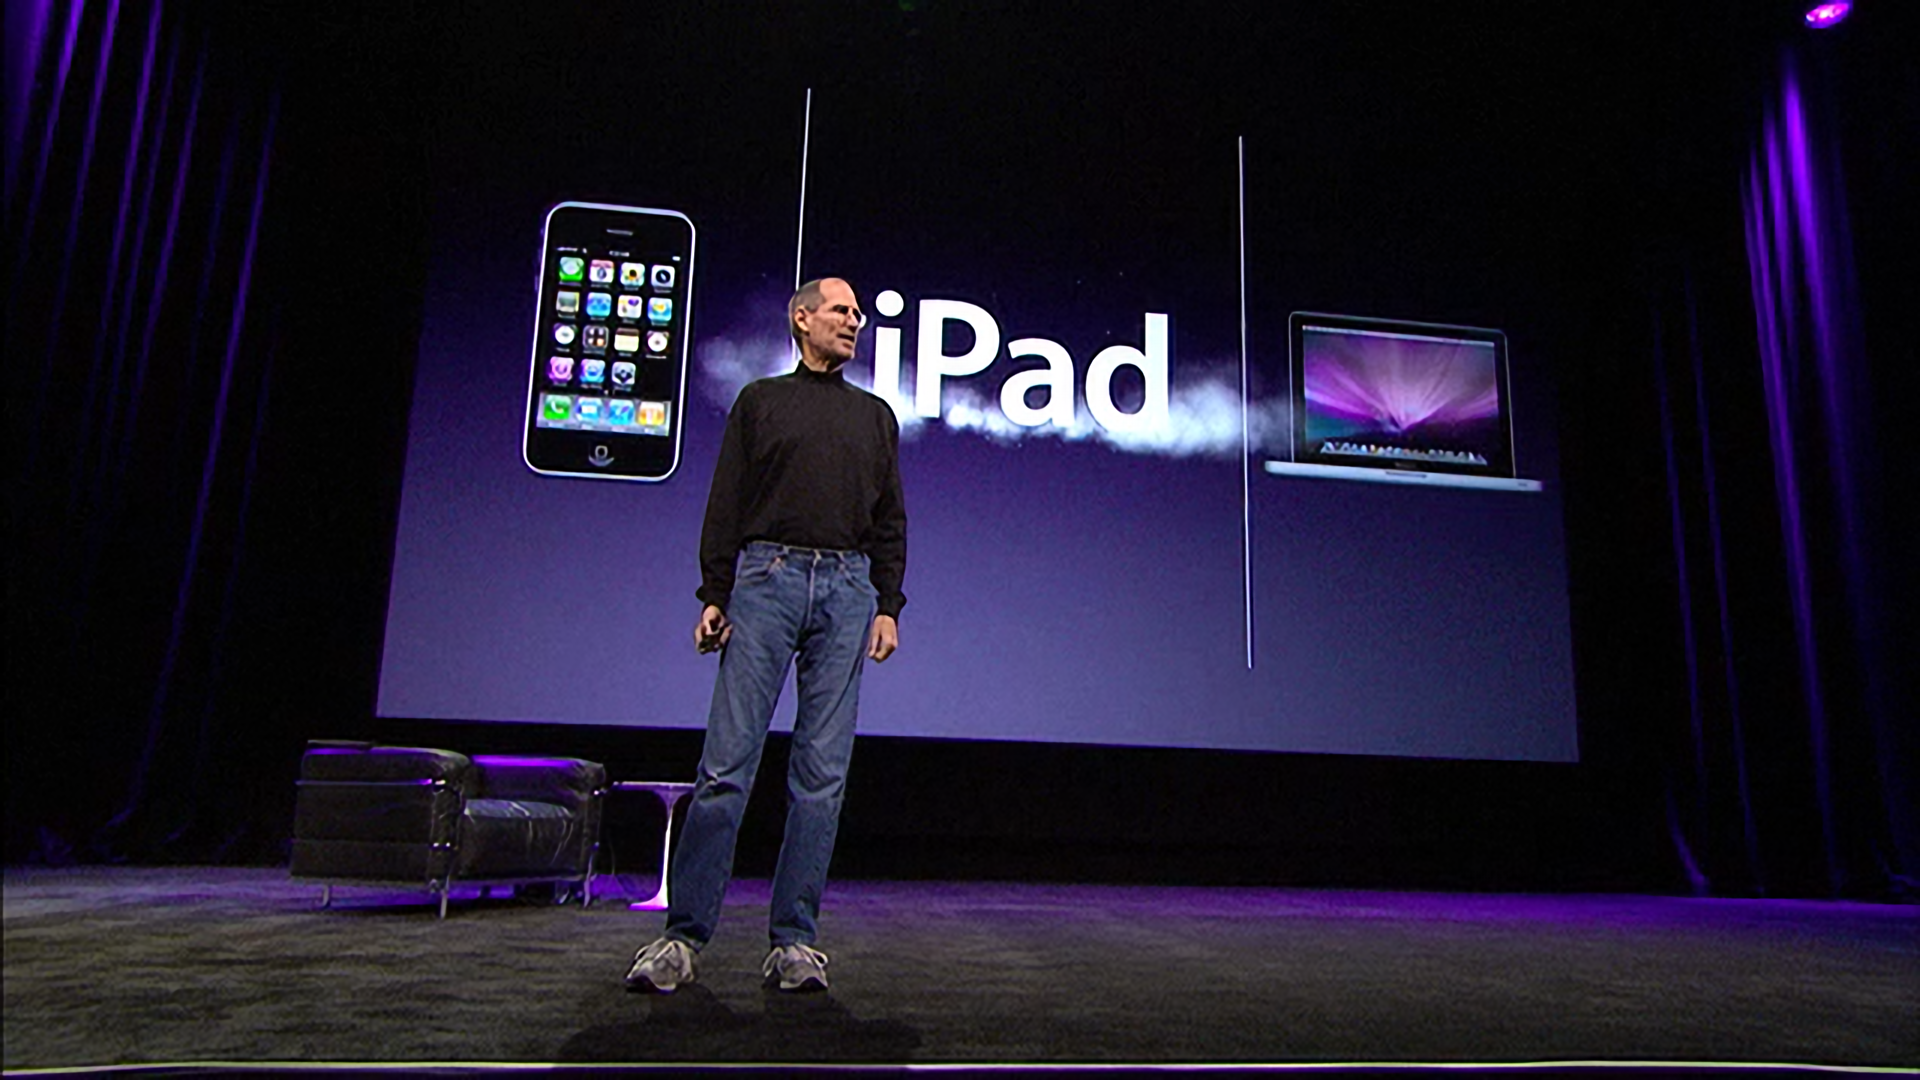 '...and we call it the iPad.'